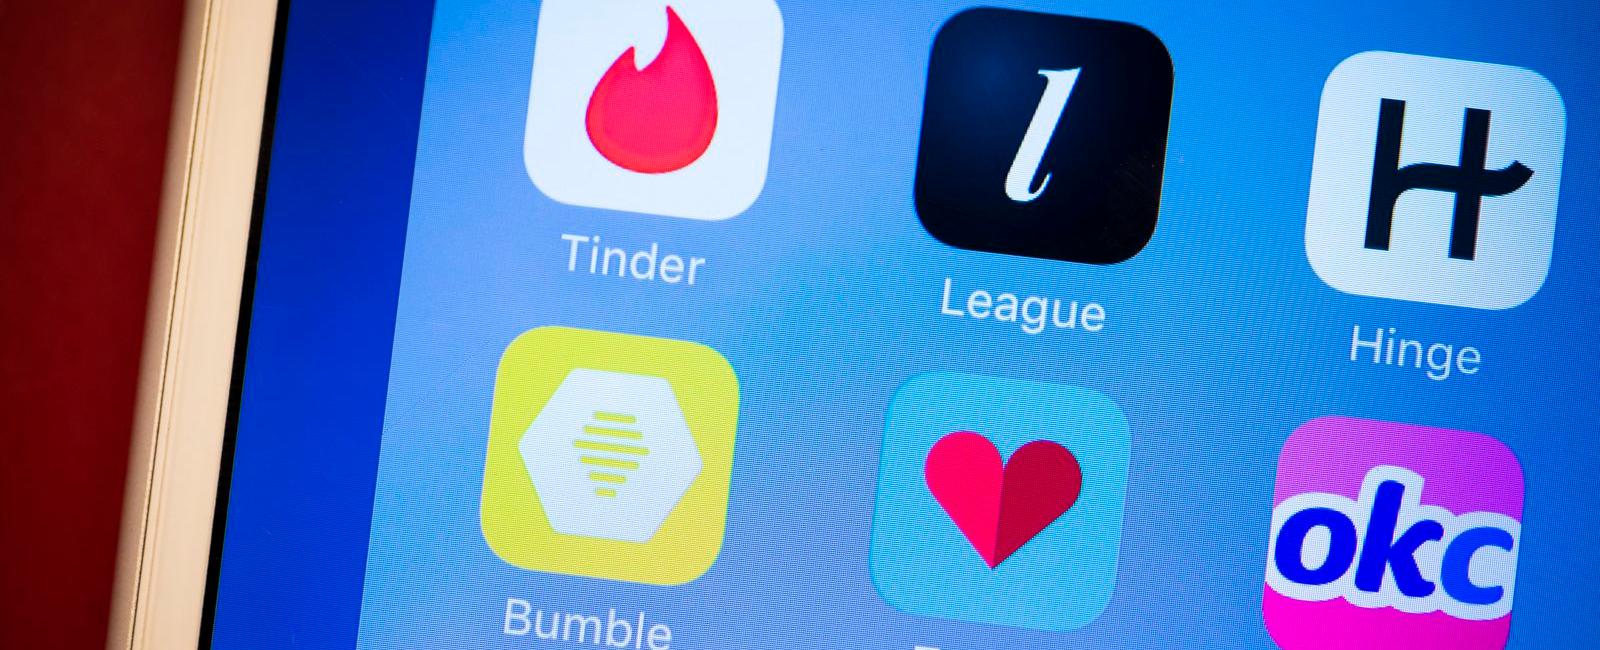 45 of the americans who have used dating apps in the past year have been left feeling more frustrated while only 28 have been left feeling more hopeful